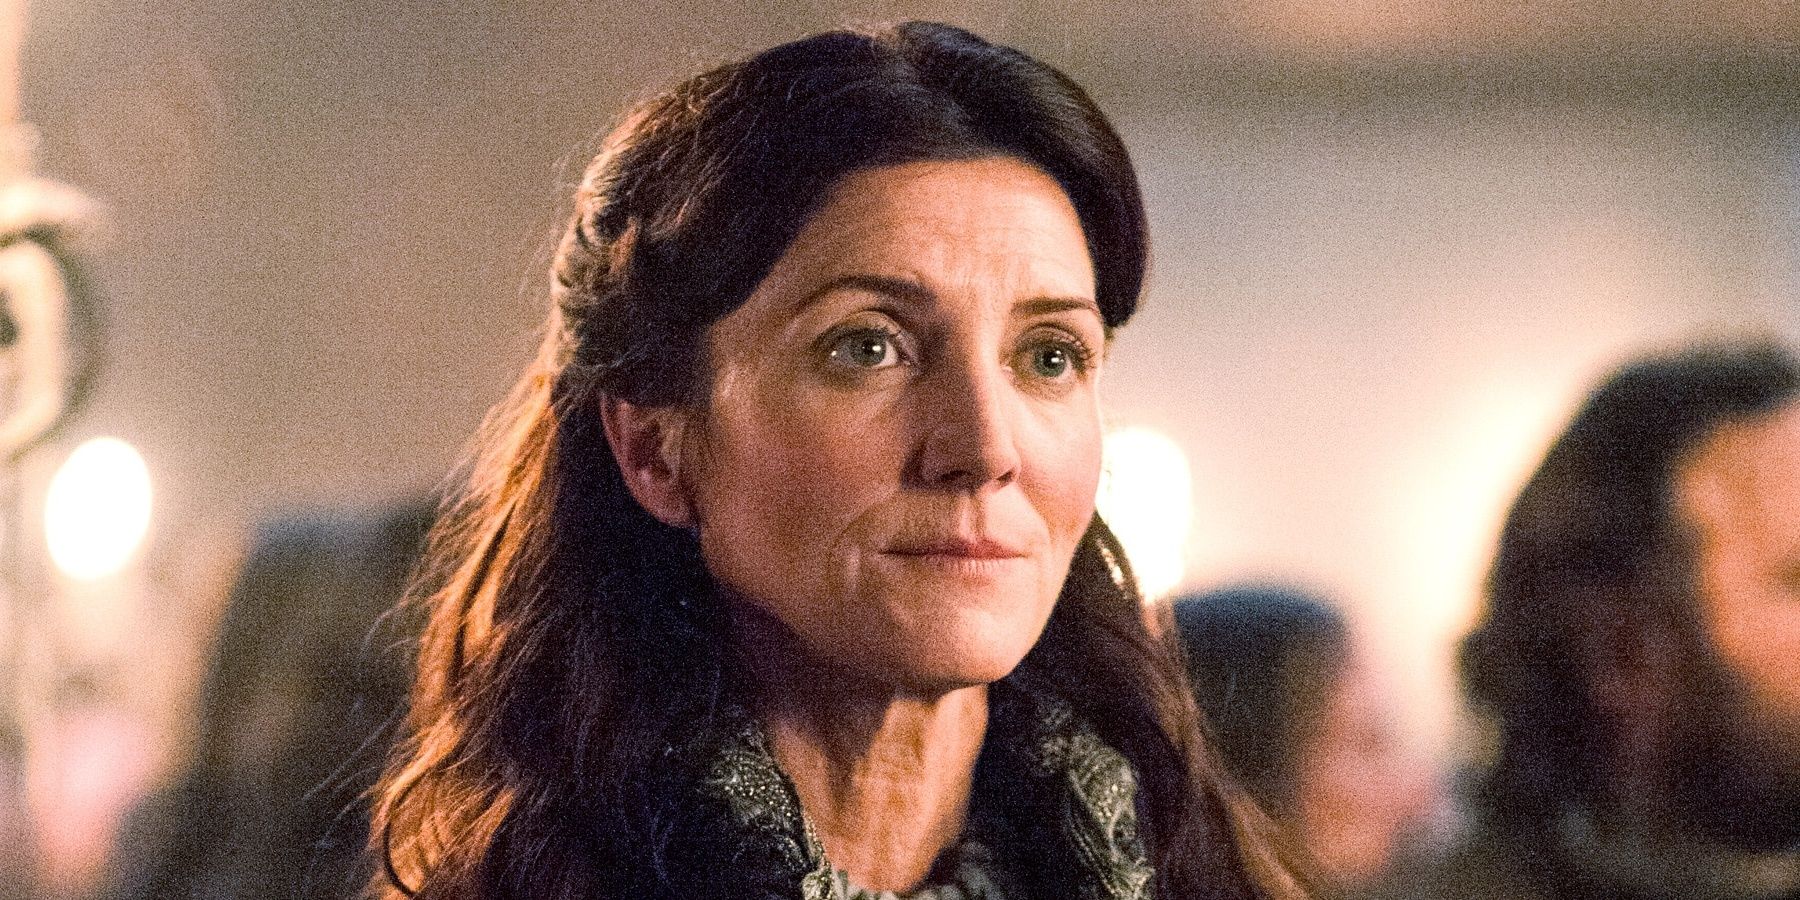 Catelyn Stark (née Tully) in Game of Thrones.